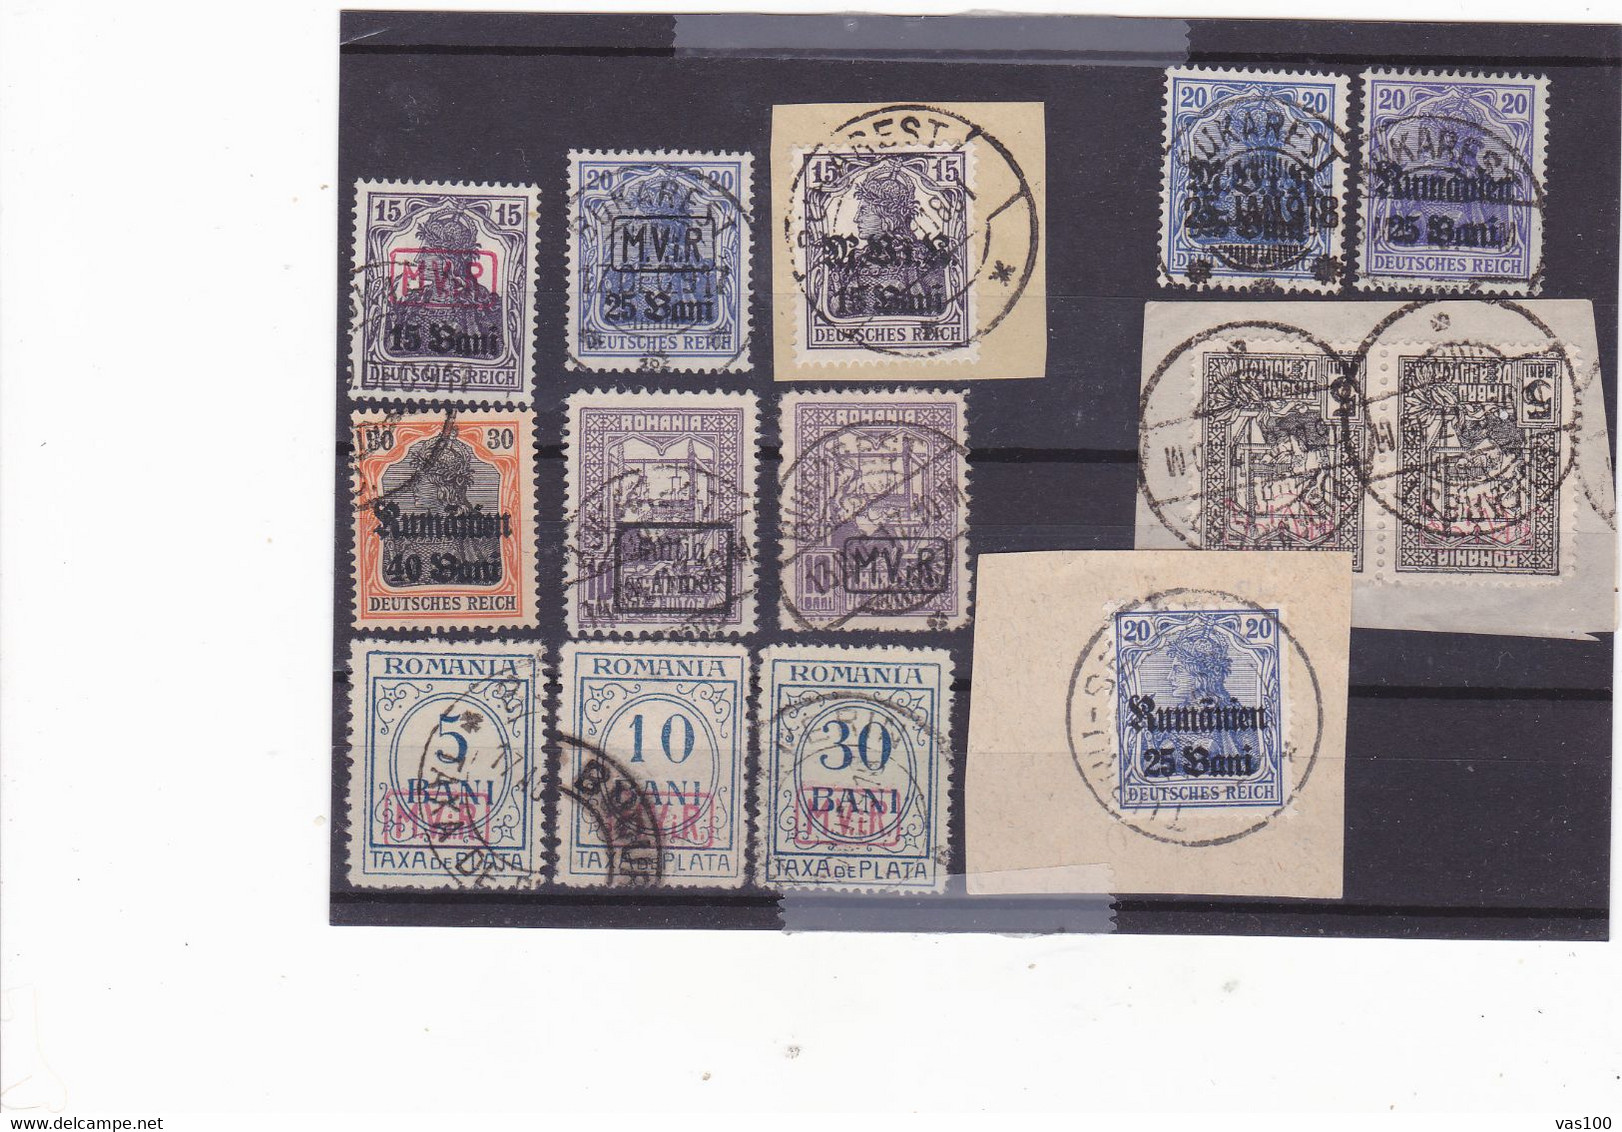 Germany Occupation Romania In WWI 1917-8 OVERPRINT LOT14 STAMPS - Ocupaciones